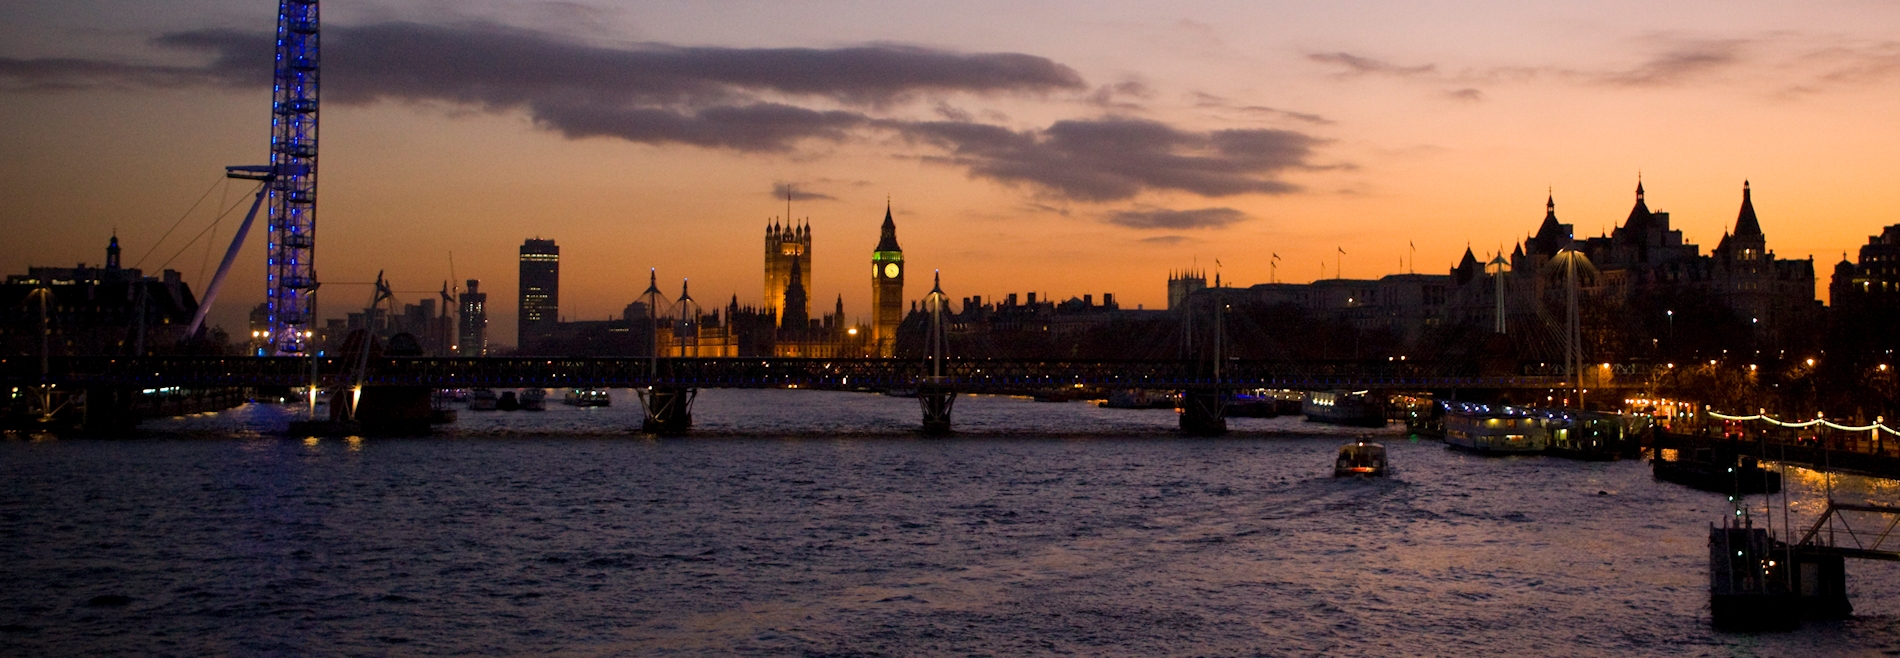 River Thames and Parliament by night